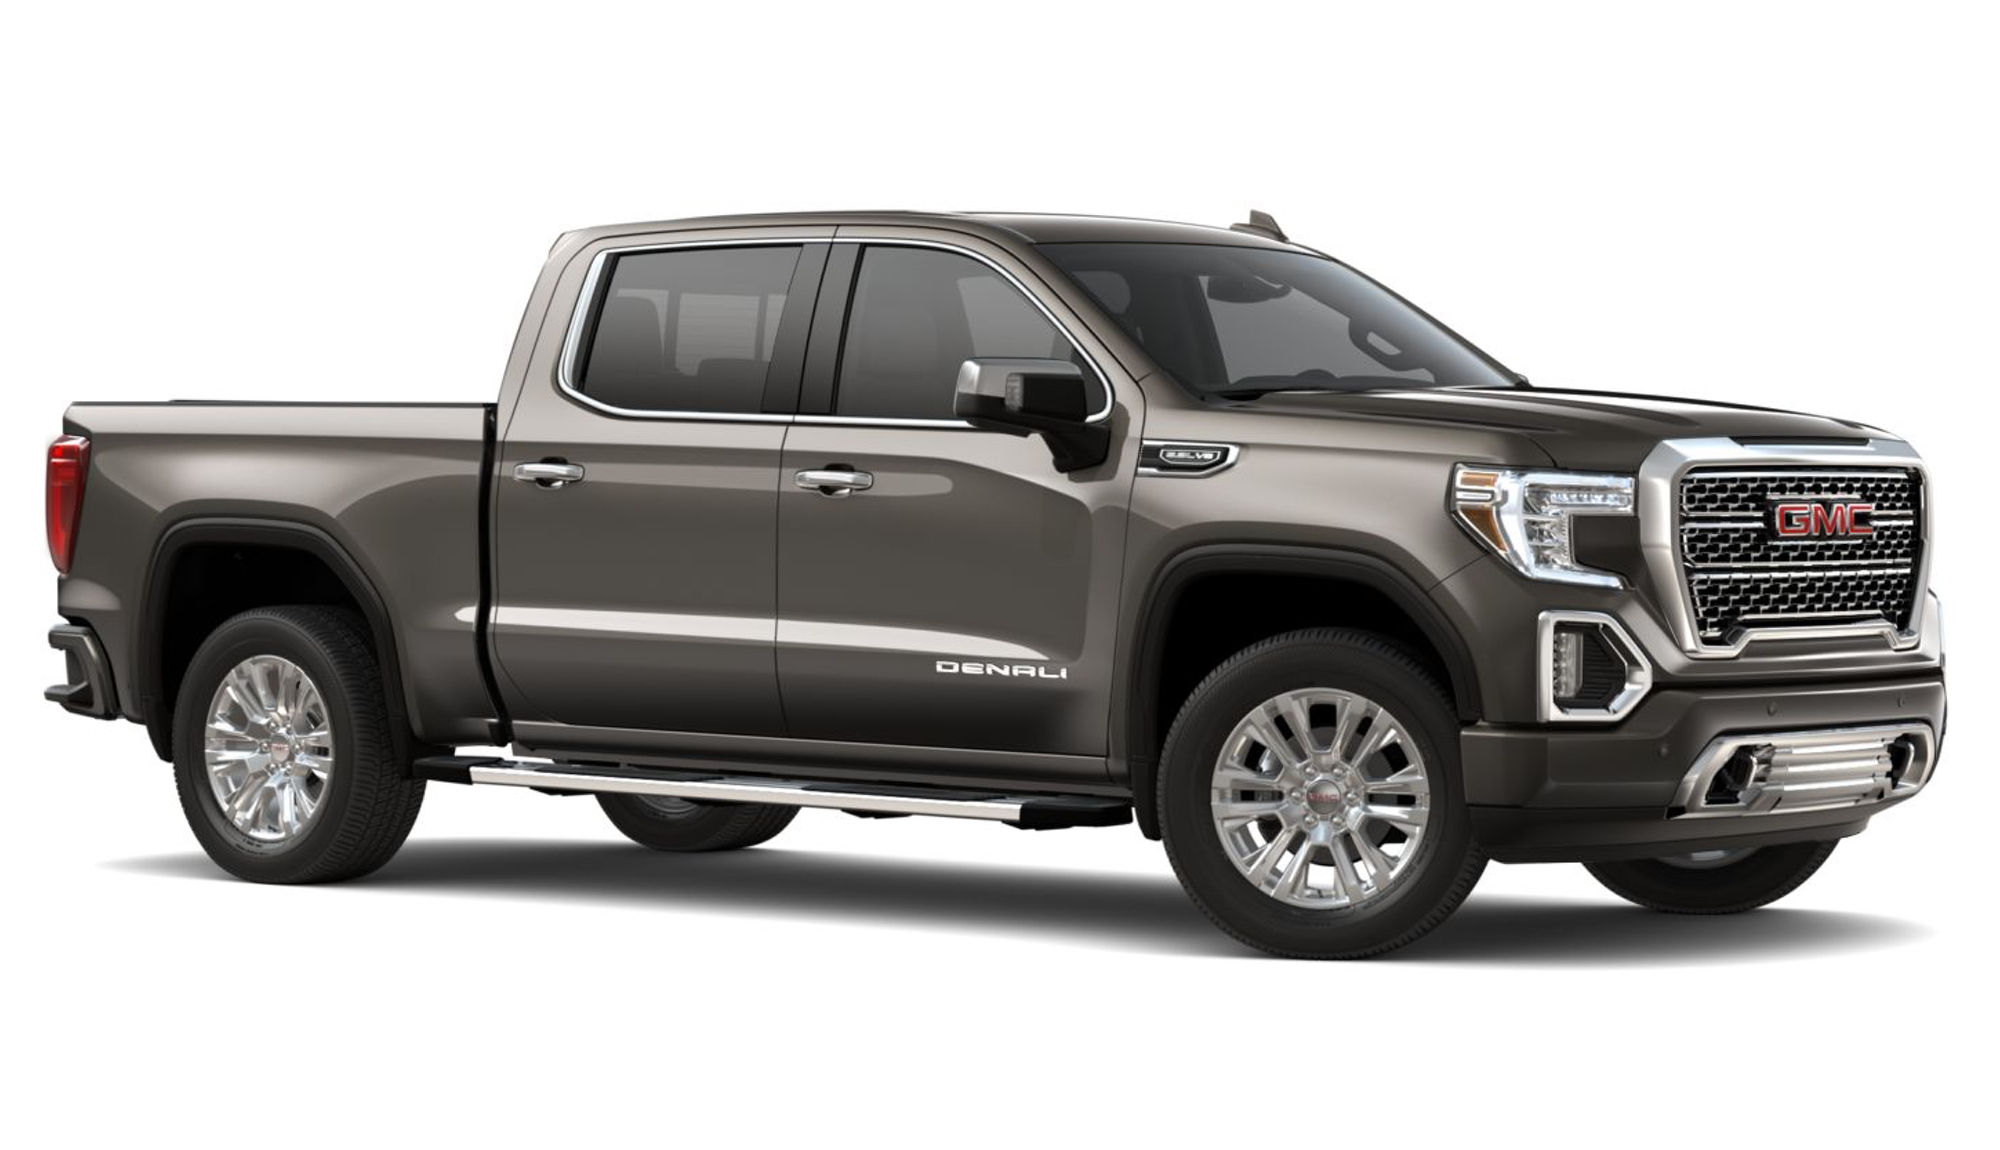 2020 Sierra 1500 Ditches This Paint Option Gains New One Gm